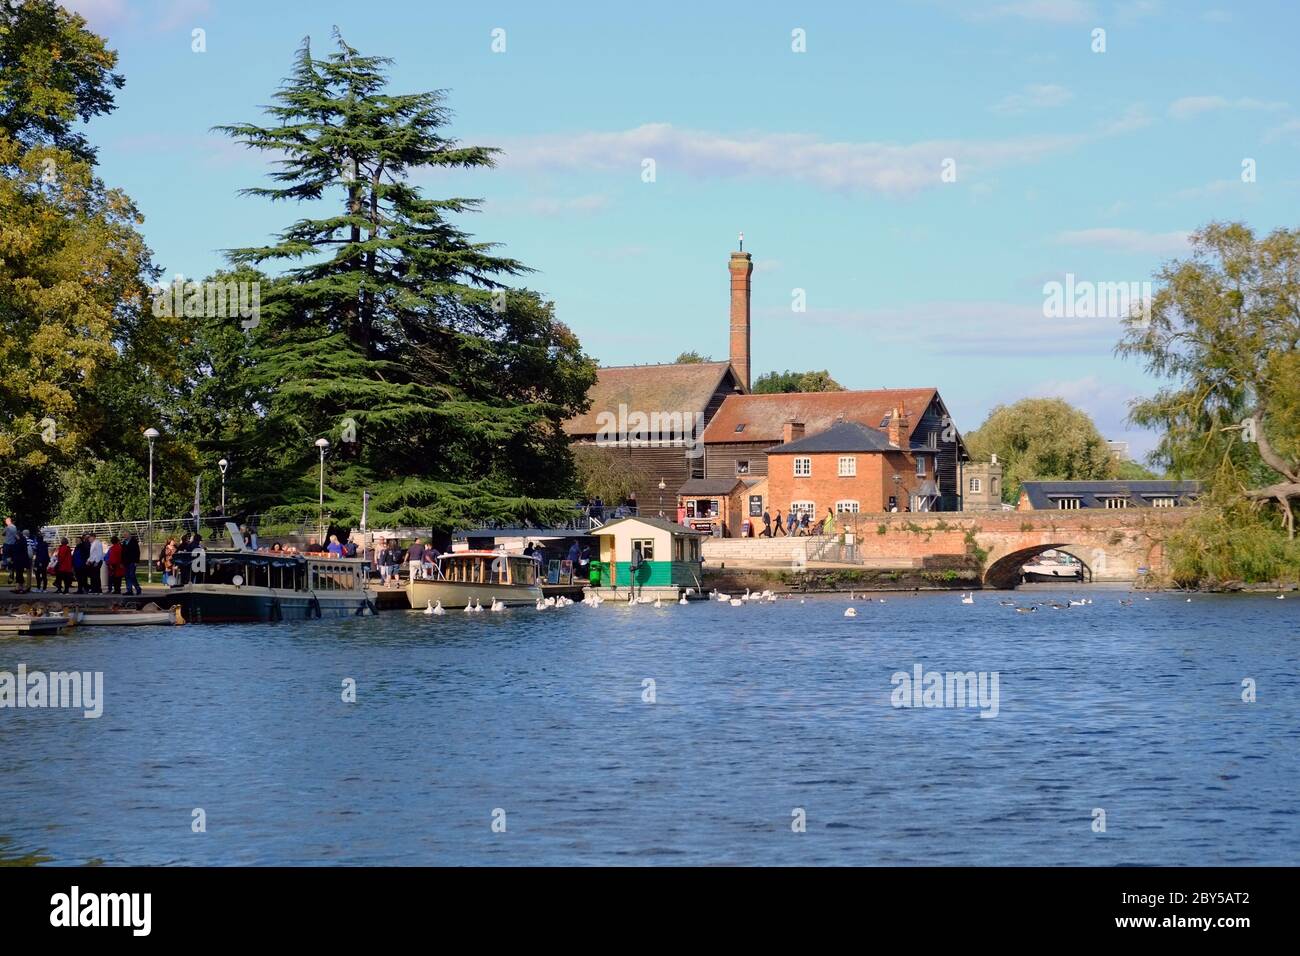 View over the River Avon to the Bancroft Gardens, river boat cruise ships and Cox's Yard, at Stratford-upon-Avon, England, UK Stock Photo